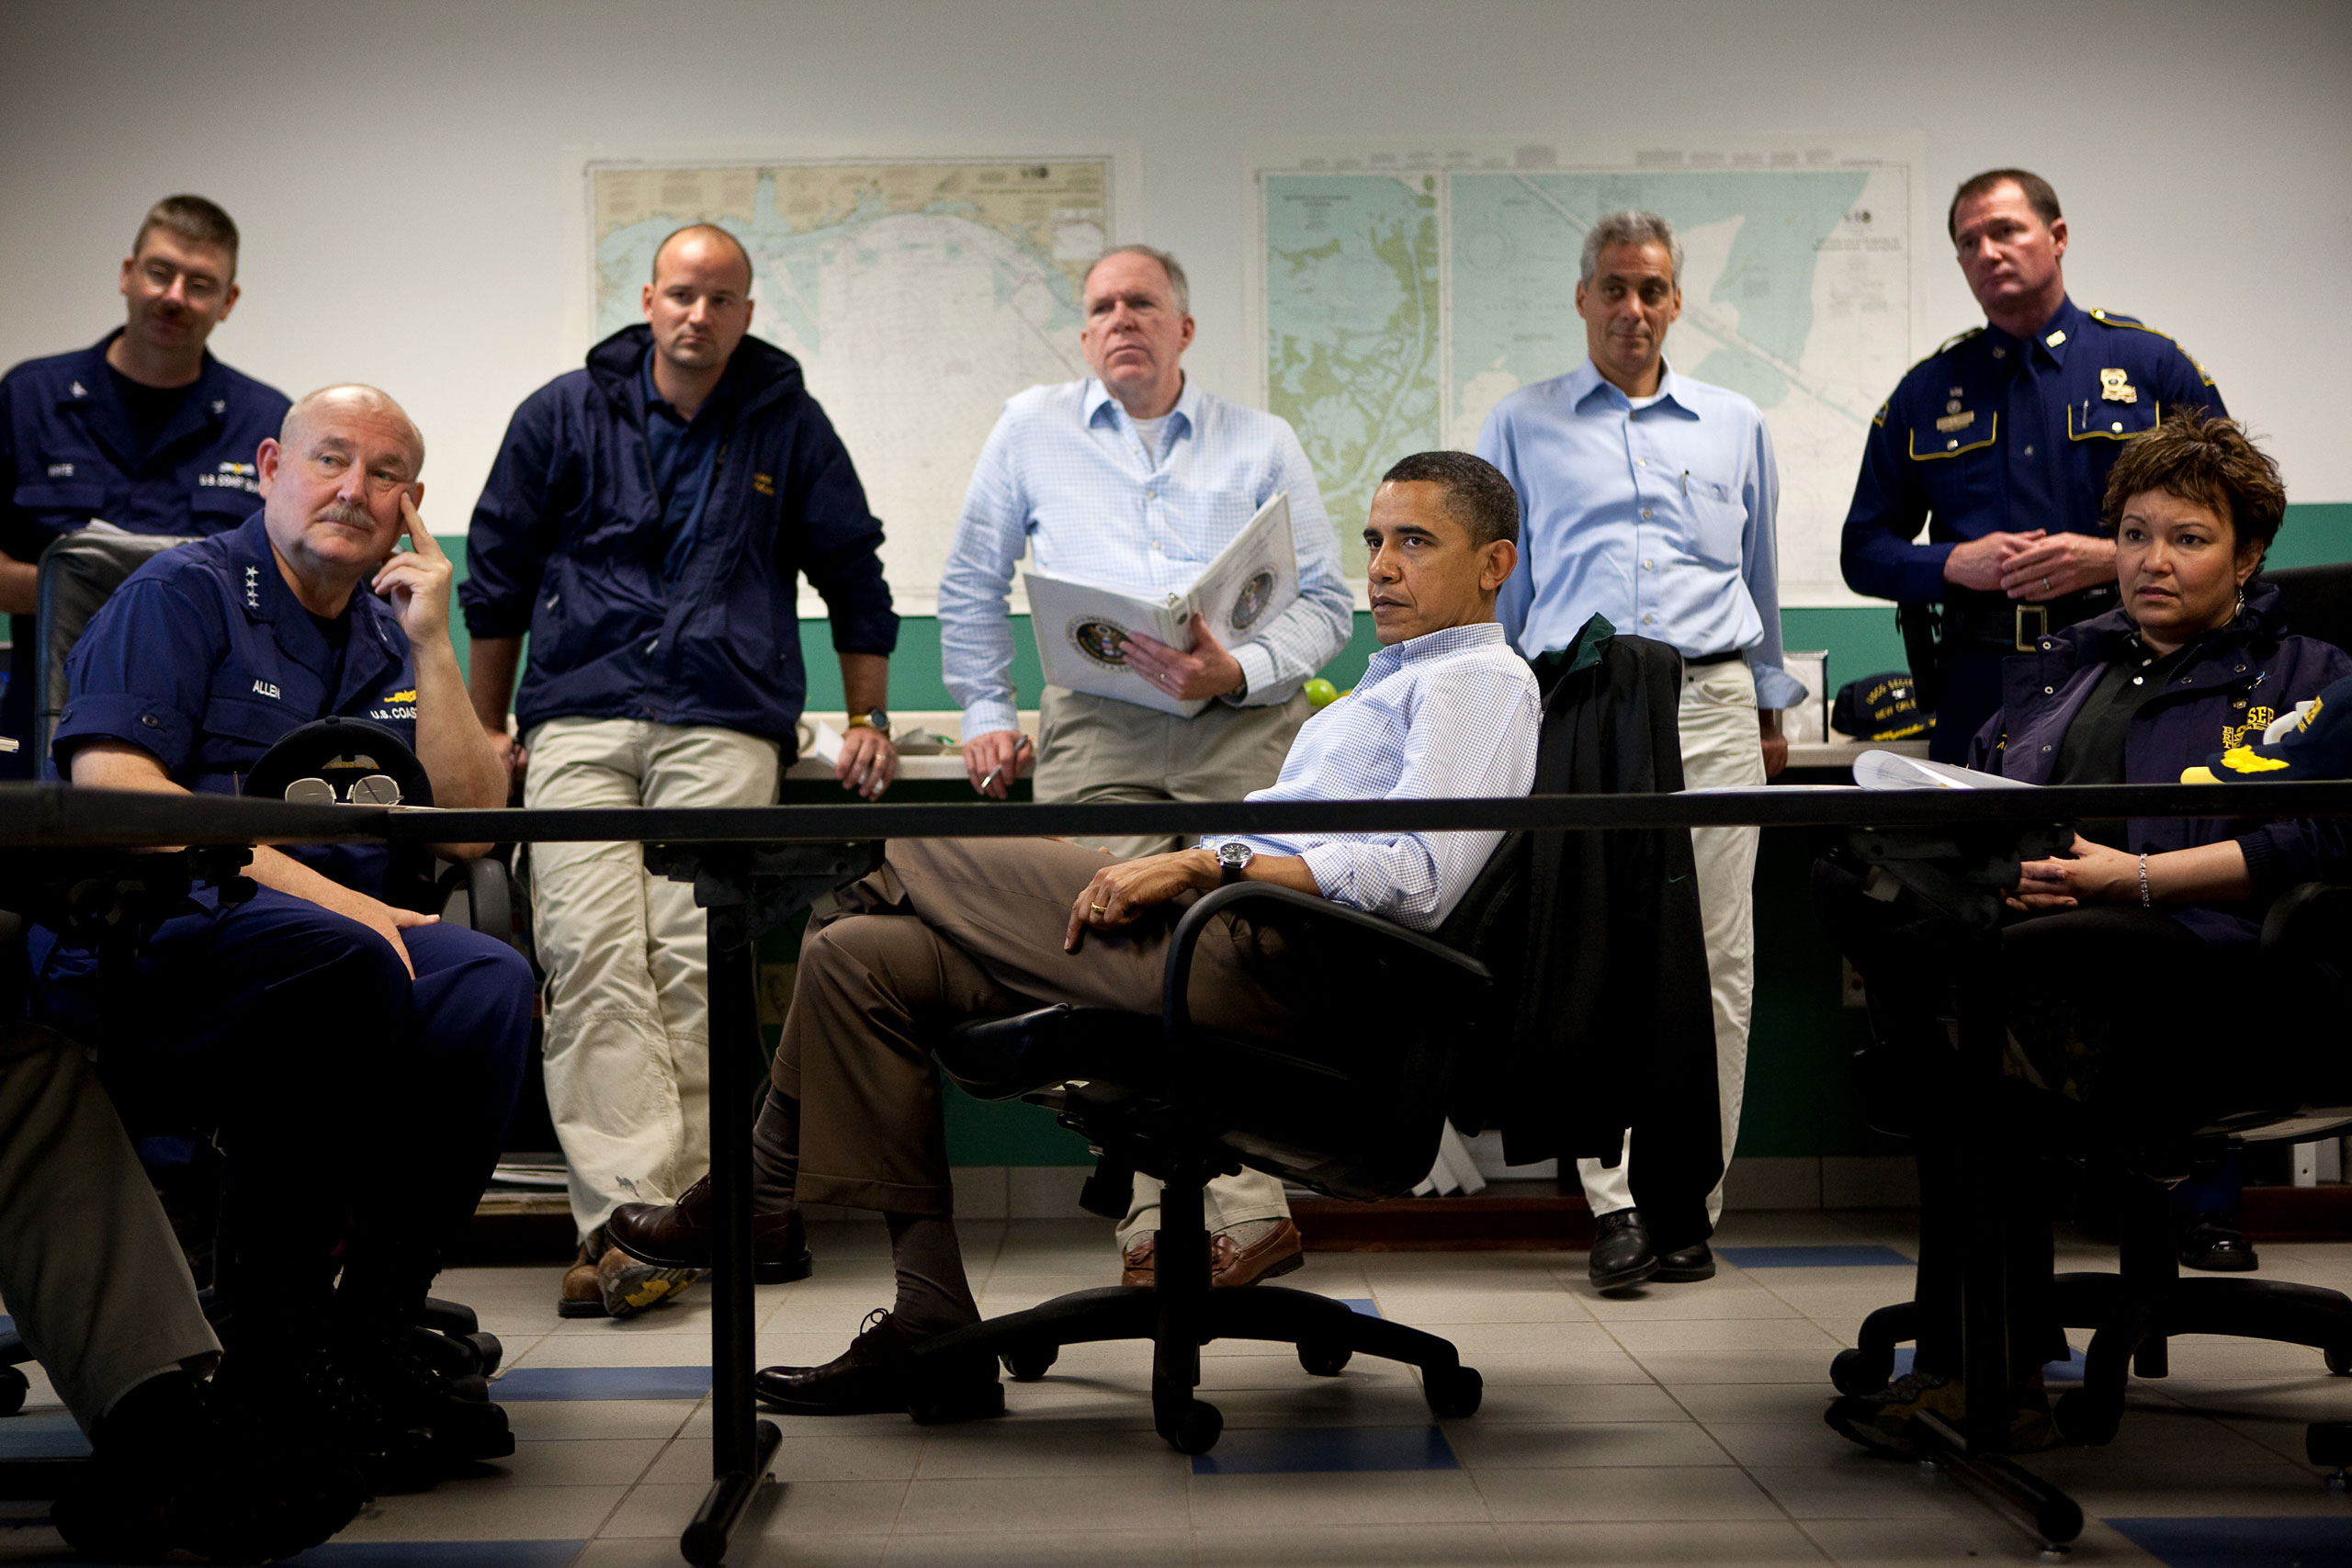 President Obama listens during a briefing about the situation along the Gulf of Mexico coast following the BP oil spill, at the Coast Guard Venice Center, in Venice, La., Sunday, May 2, 2010. Pictured, from left, are Admiral Thad Allen, U.S. Coast Guard Commandant Admiral; John Brennan, Assistant to the President for Homeland Security and Counterterrorism; Chief of Staff Rahm Emanuel; and EPA Administrator Lisa Jackson.